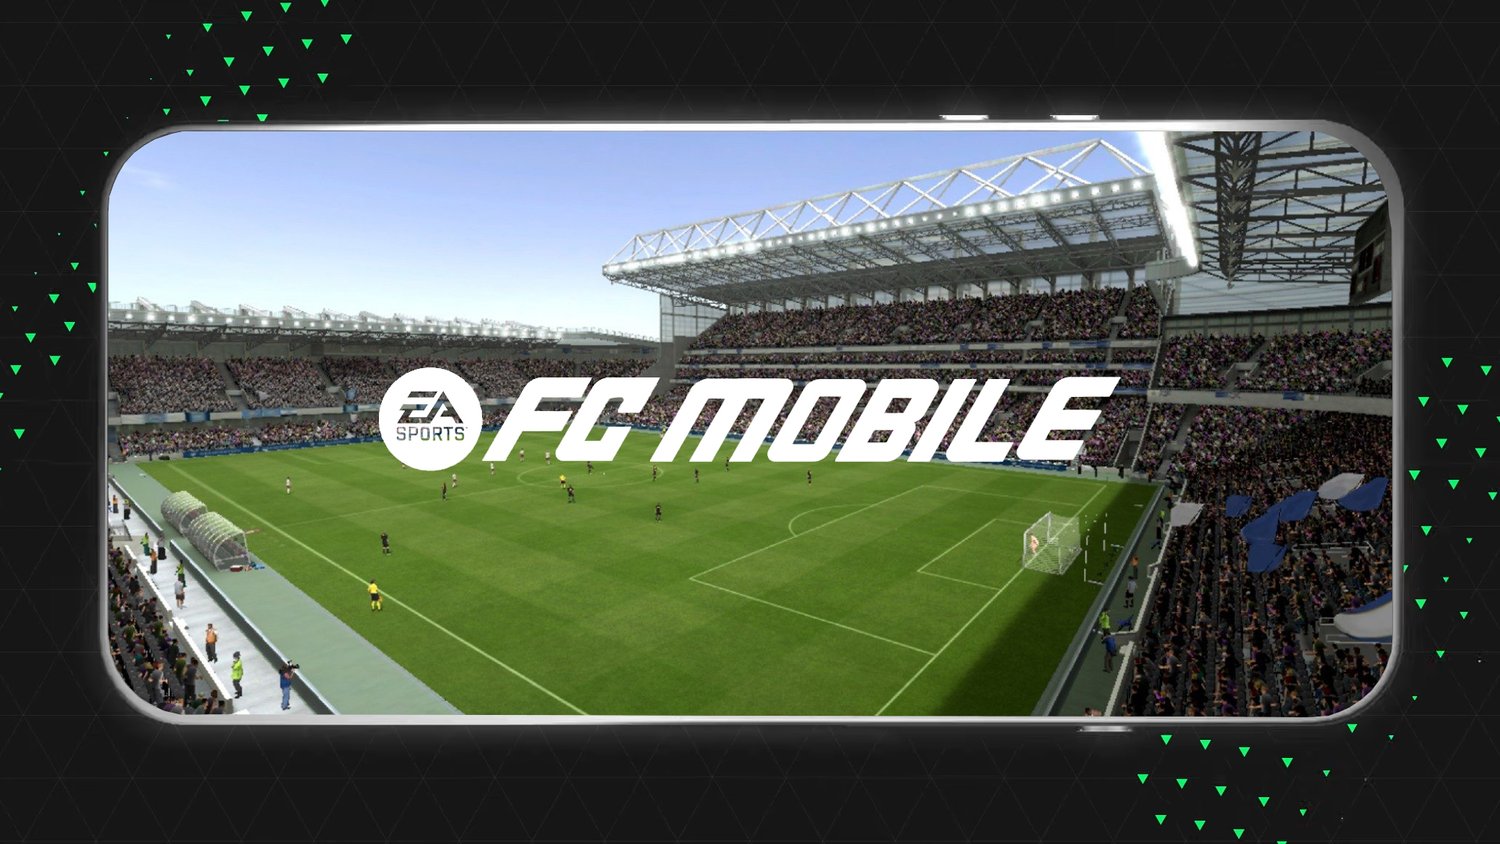 EA SPORTS FC™ Mobile - News and Updates - EA SPORTS Official Site